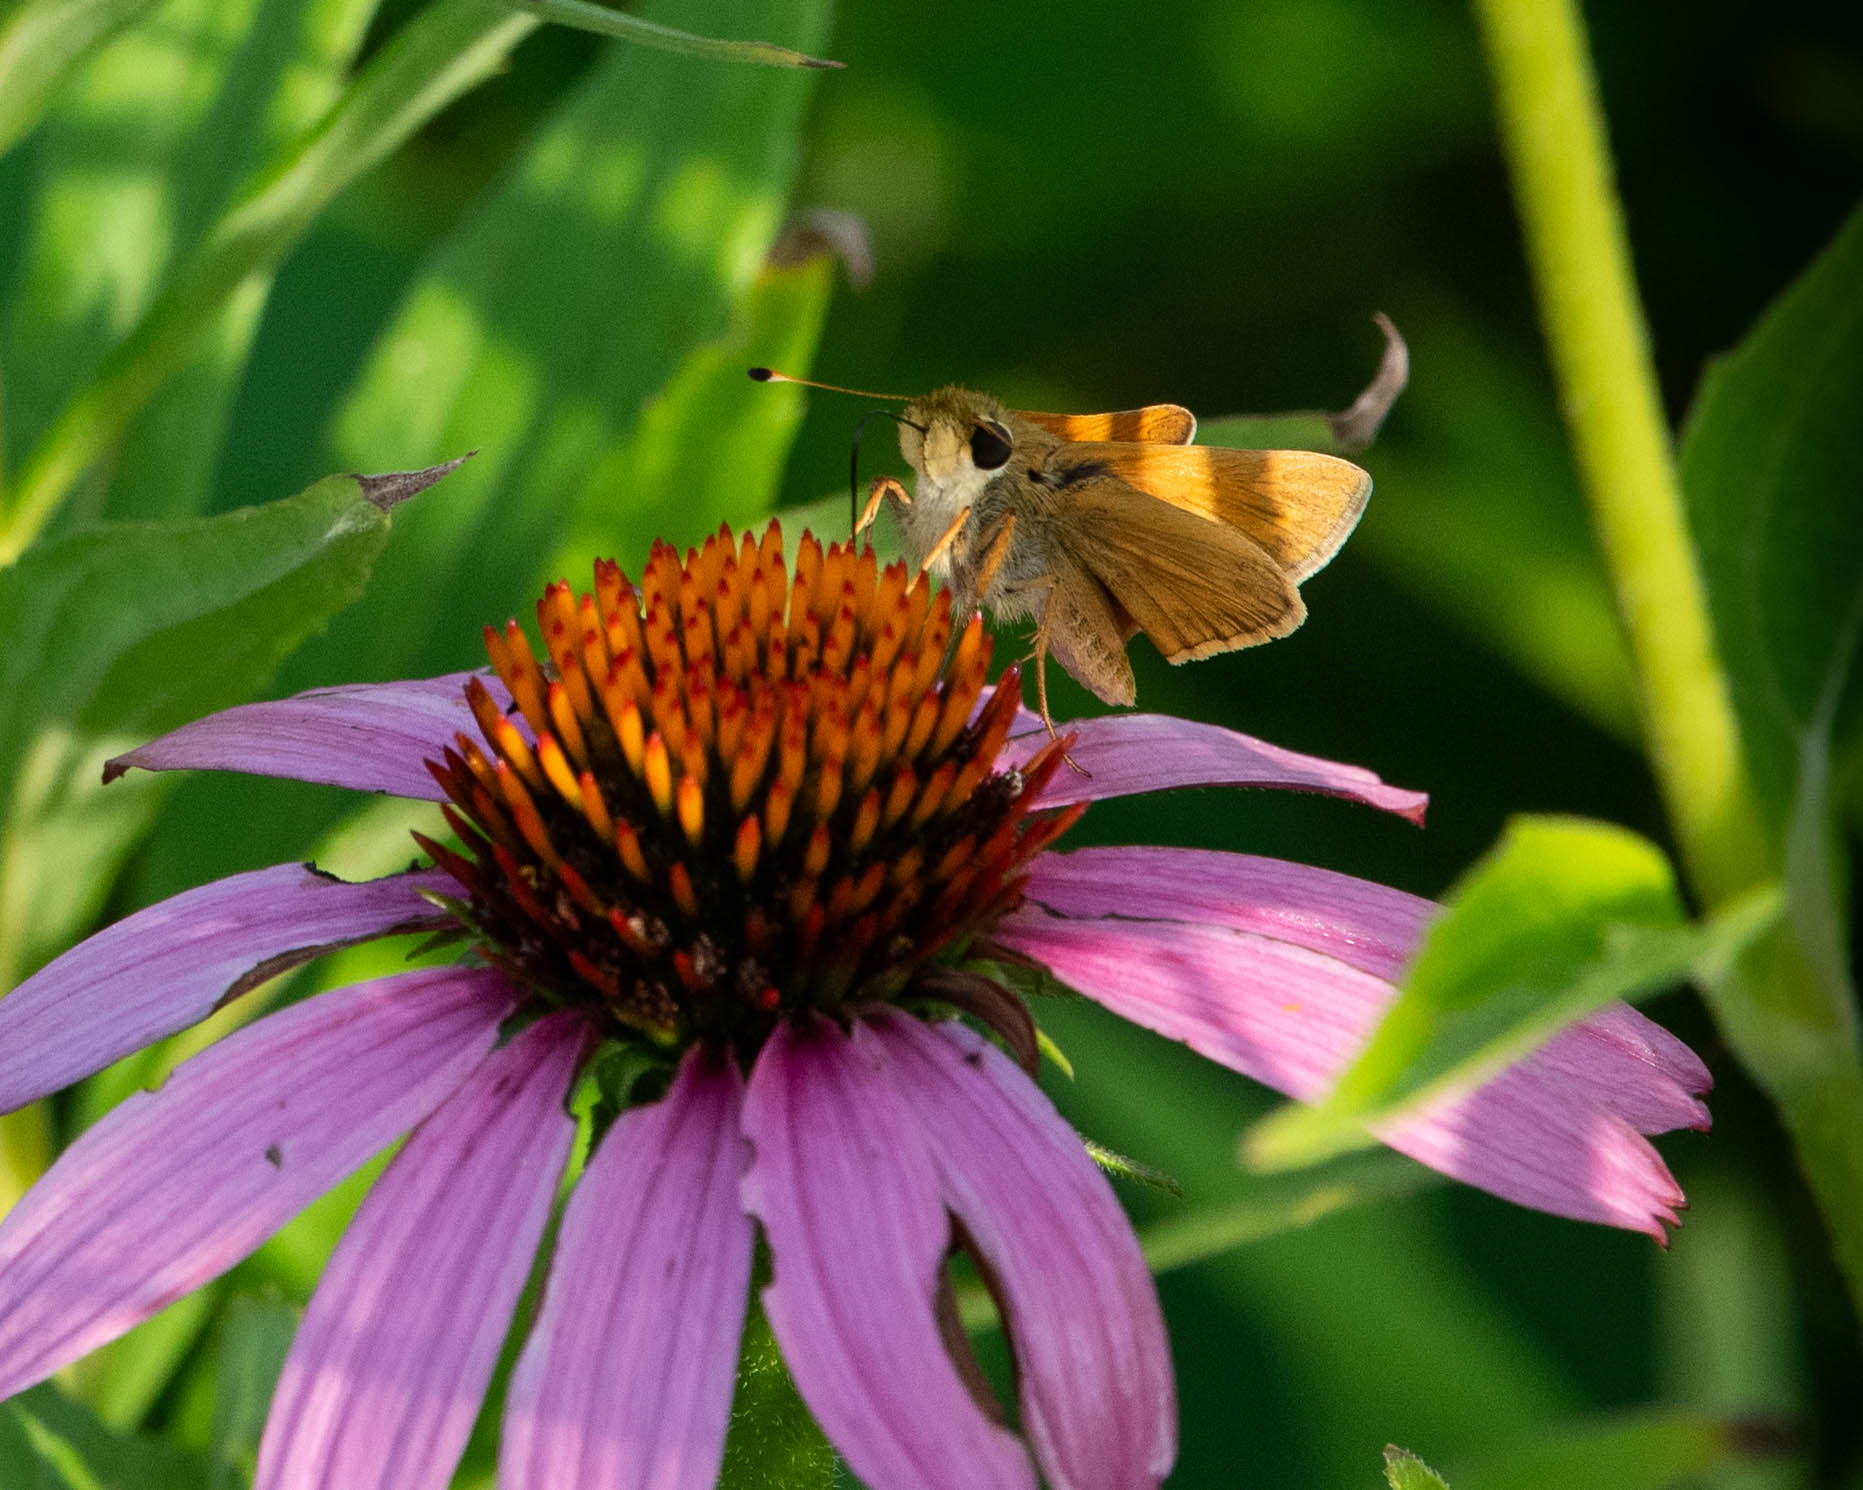 A small brown-orange skipper butterfly perches on a purple coneflower with a bright brown center.